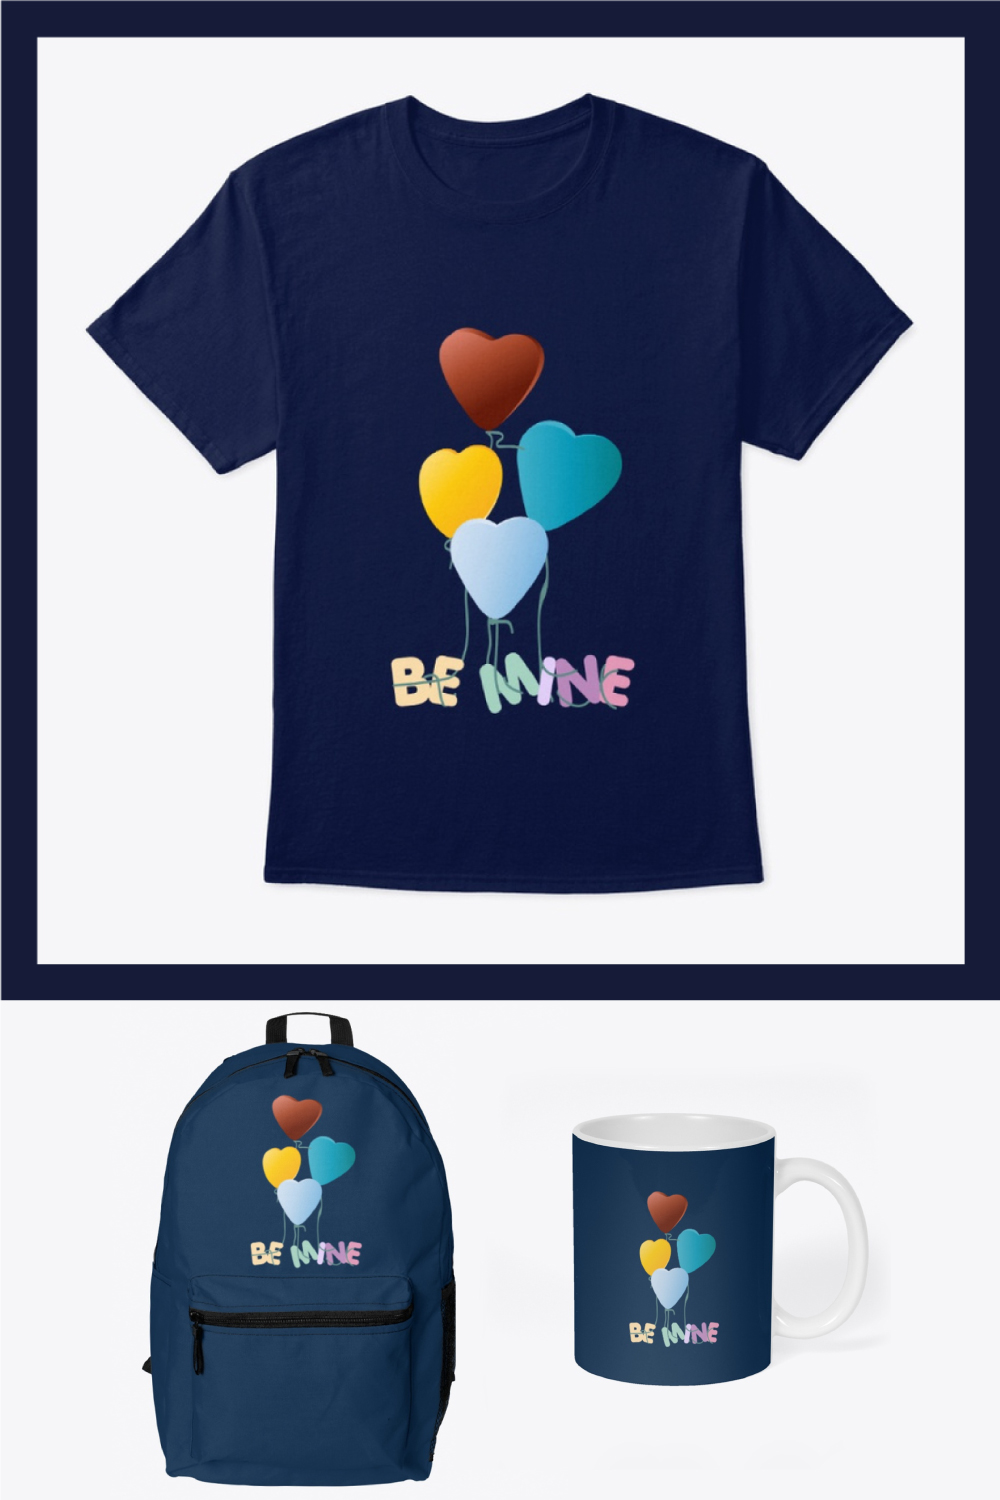 Be Mine typography tshirt design with colorful love or heart shaped balloons pinterest preview image.